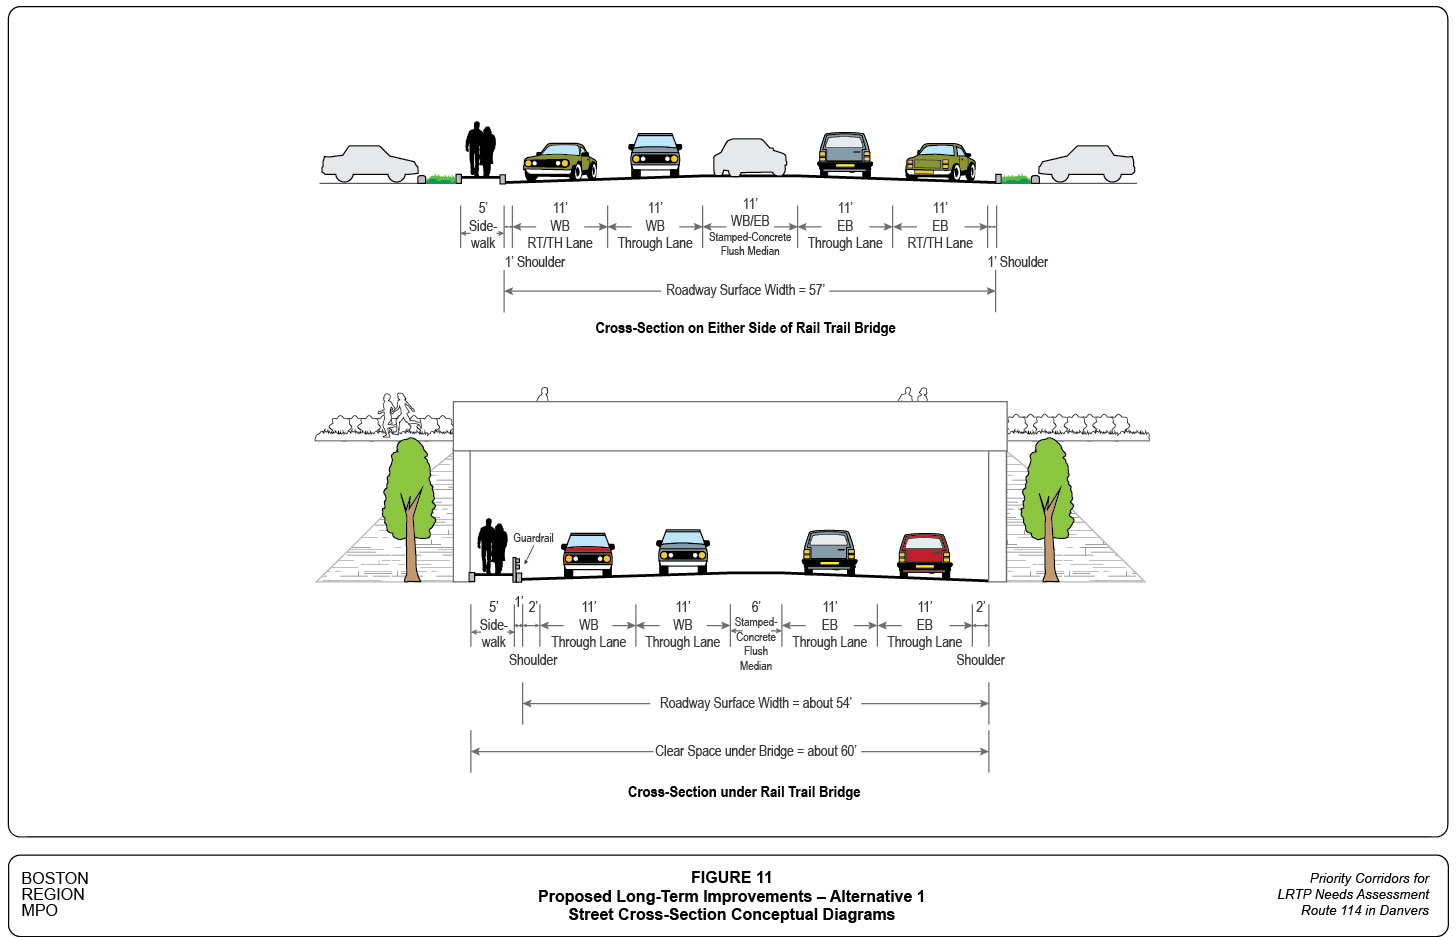 Figure 11 shows the proposed roadway cross-section modifications in Alternative 1 in the section near and under the rail trail bridge.